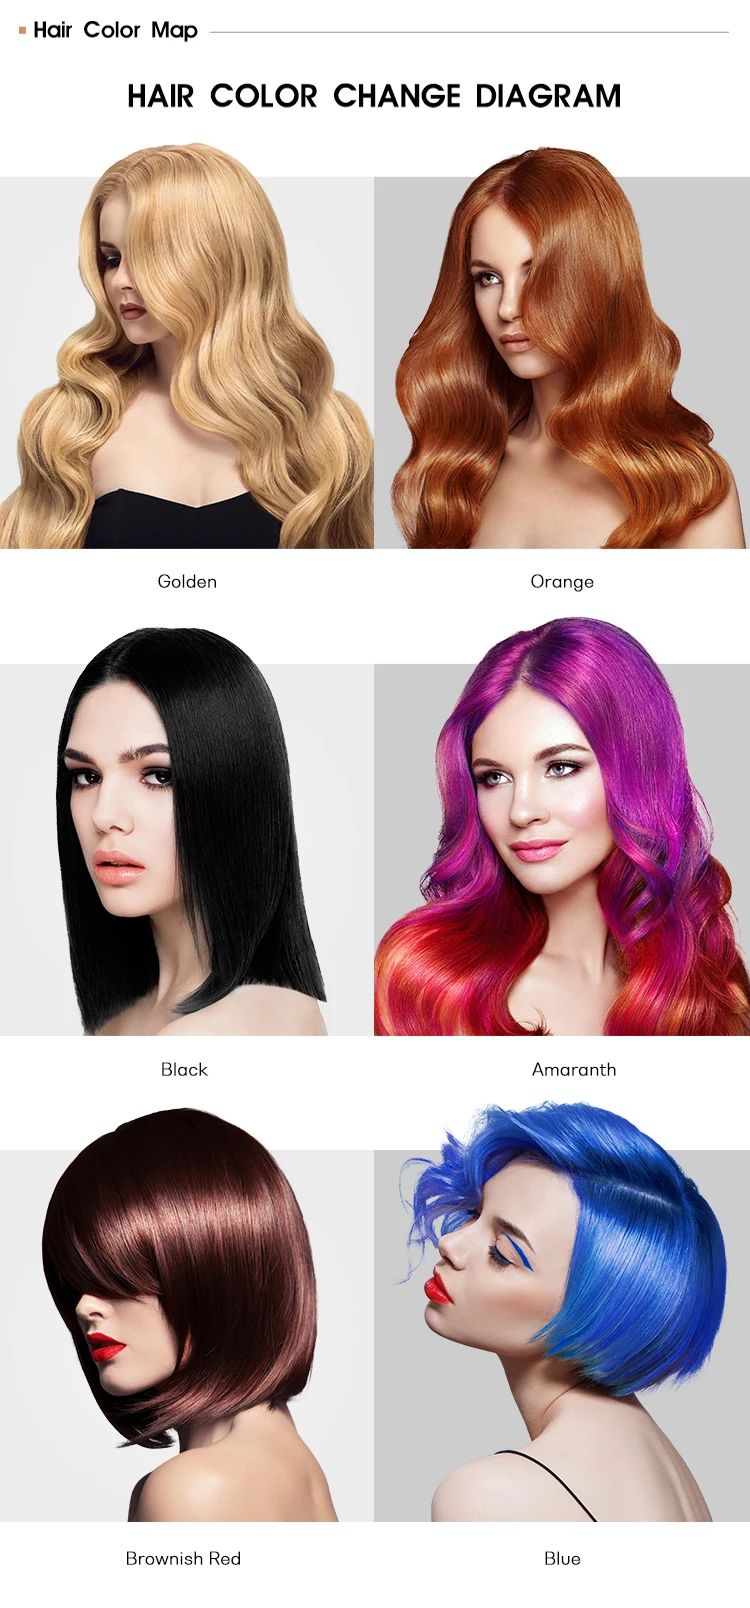 Cheap Private Label 4d White Herbal Hair Color Colour For India - Buy 4d Hair  Colour,White Hair Colour,Herbal Hair Color India Product on 